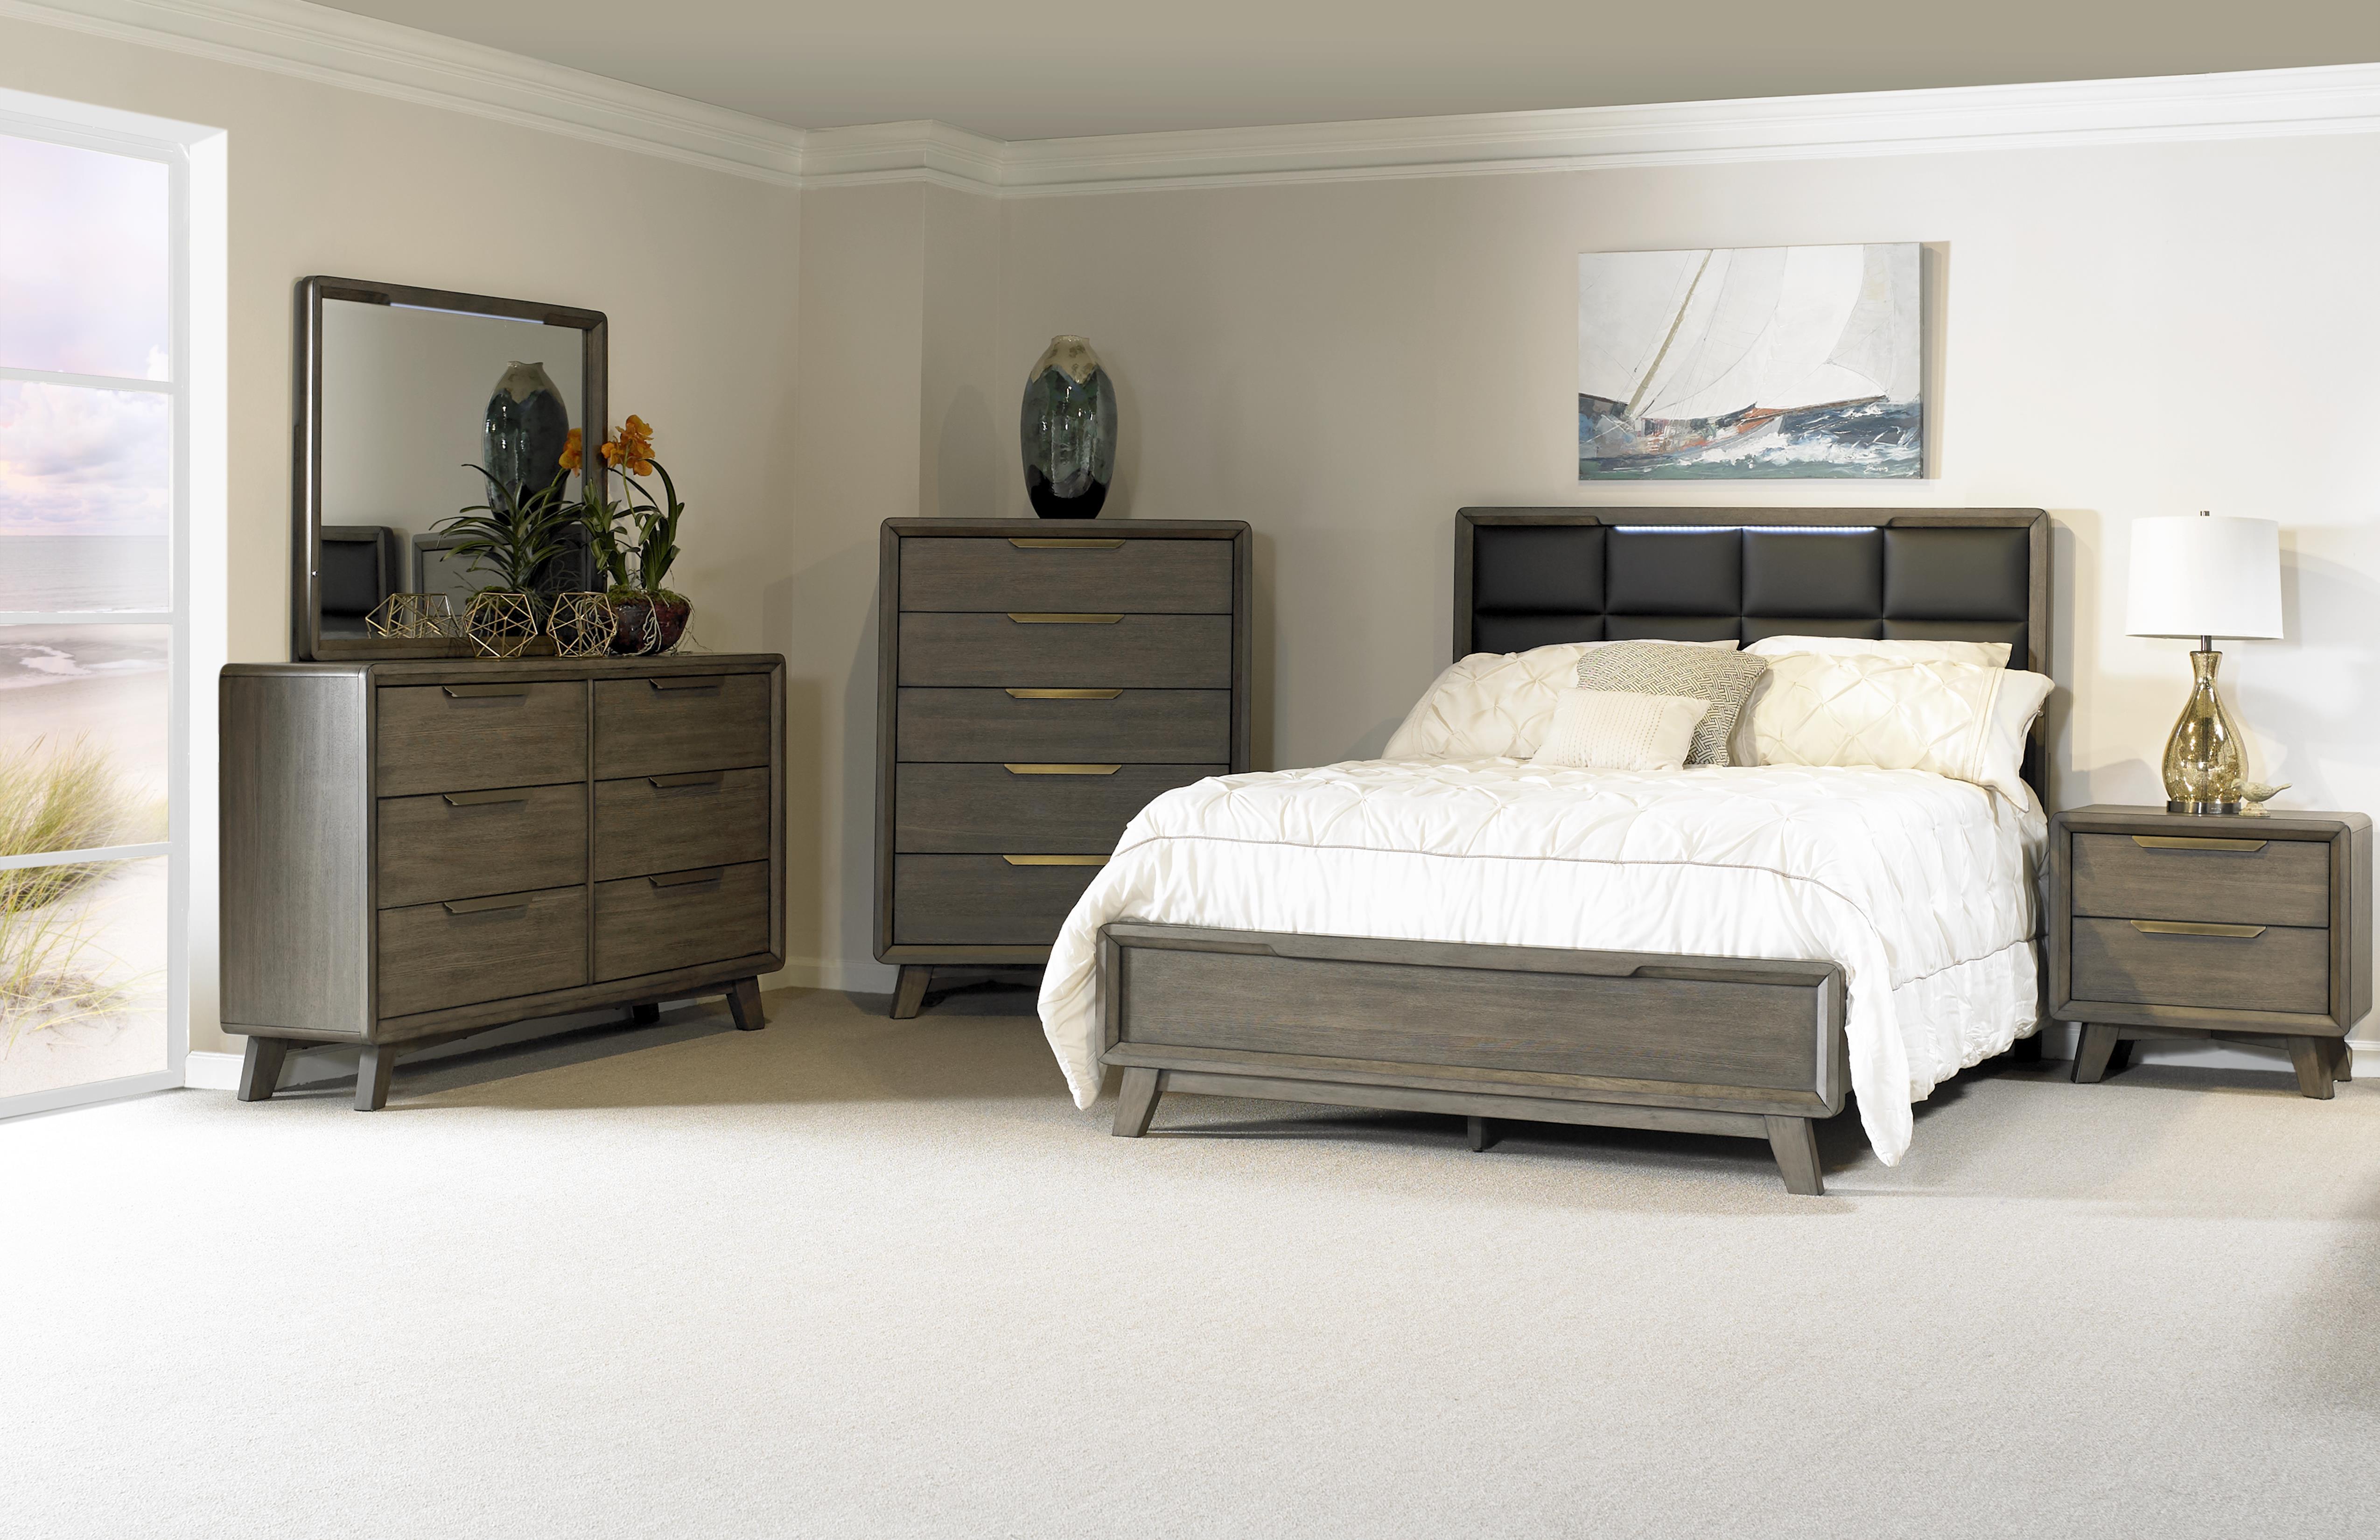 Contemporary, Modern Panel Bedroom Set VALENCIA 213-110-Set-6 213-110-2NDMC-6PC in Coffee, Brown Faux Leather